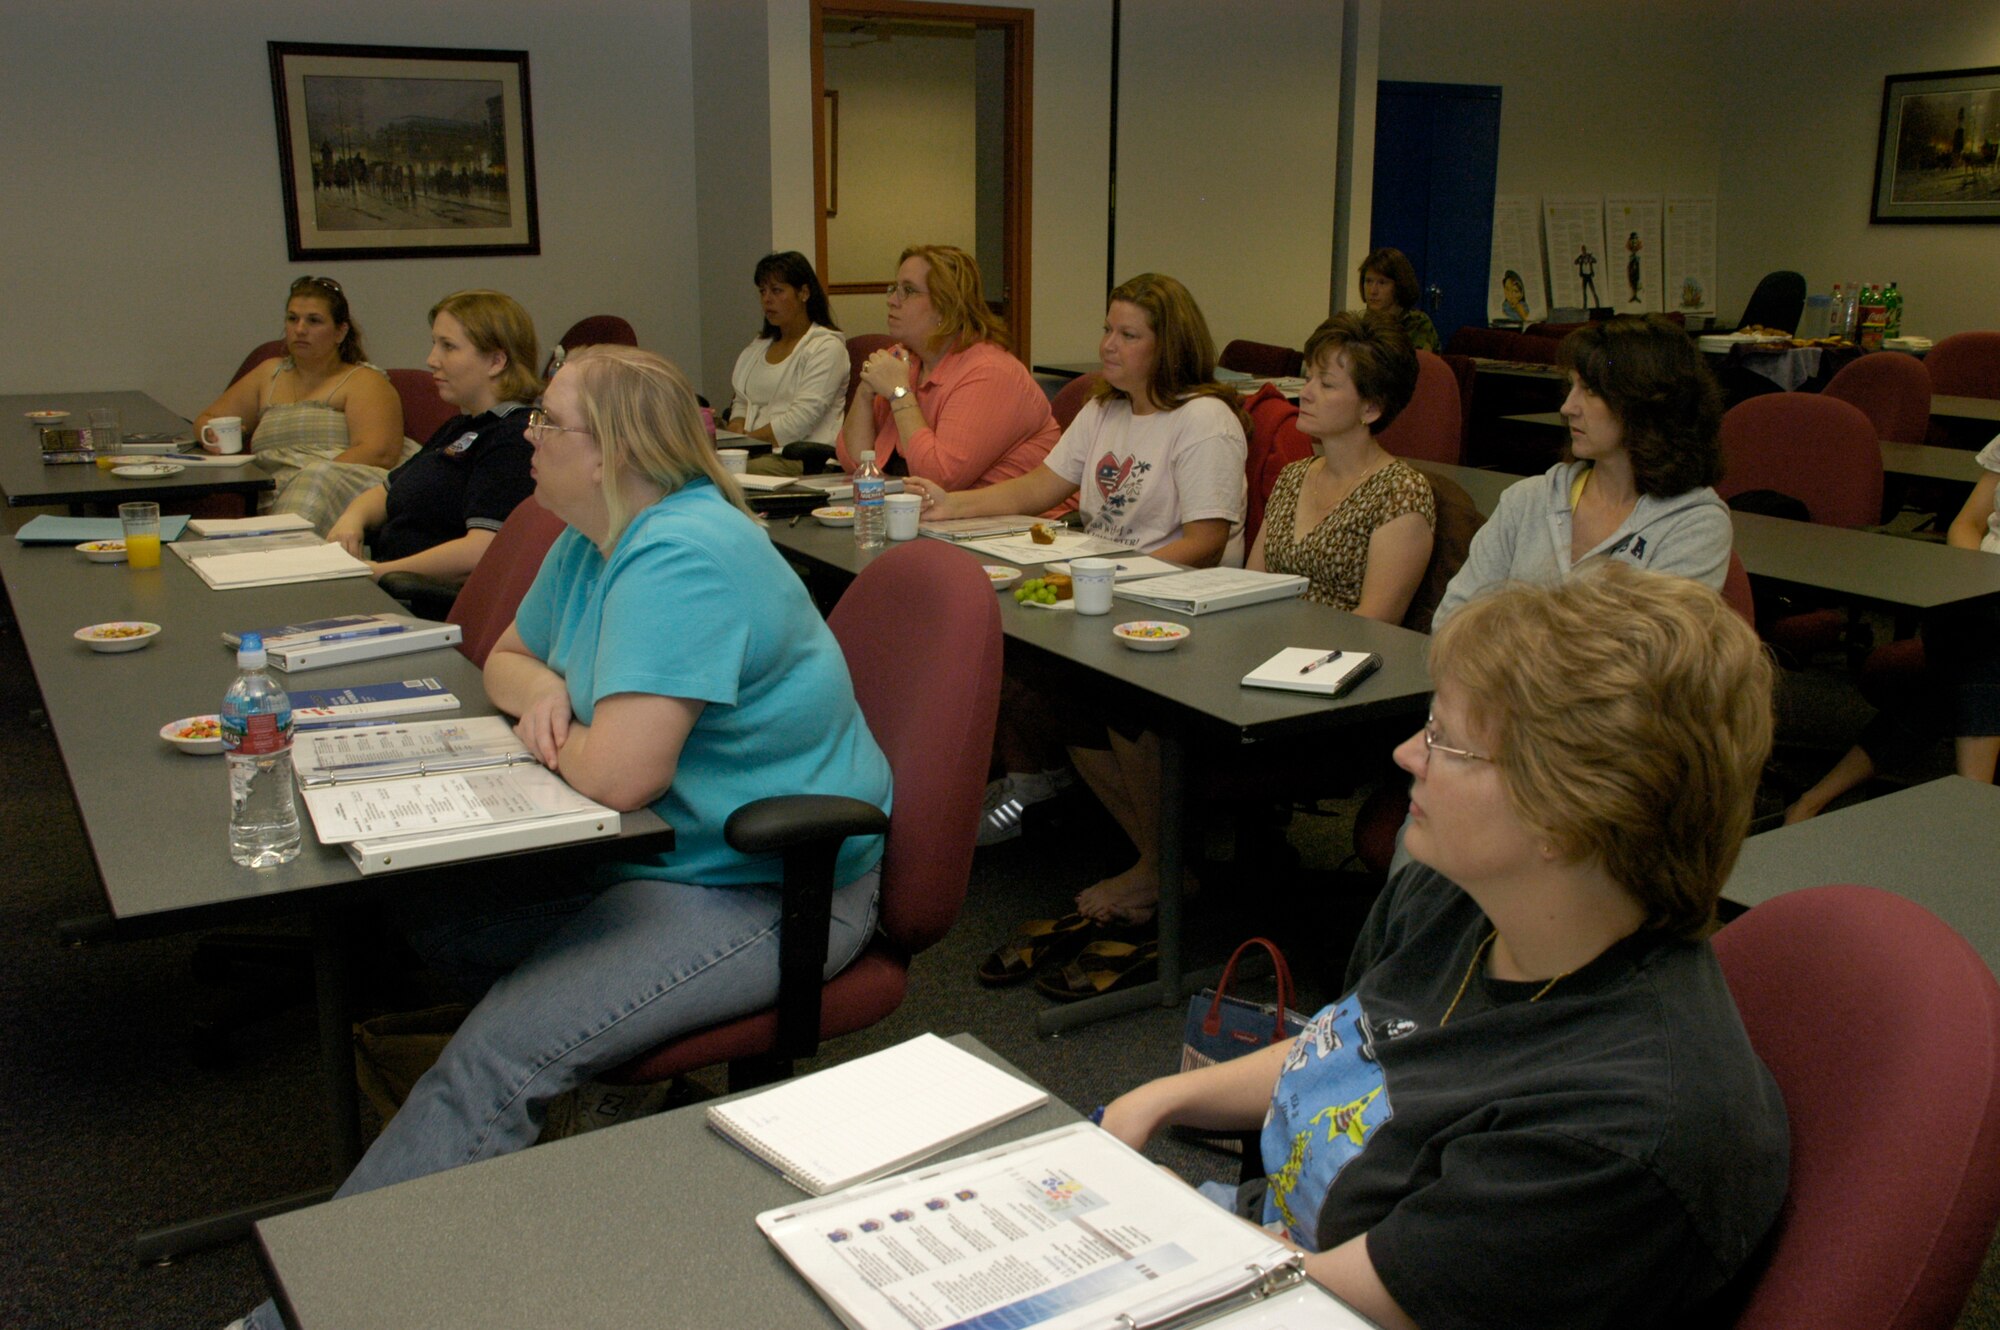 Members of Warren’s new key spouses program listen to their roles and responsibilities during their training class at the Airman and Family Readiness Center June 9. The key spouse program was created to enhance mission readiness and retention by increasing the flow of information between leadership, base support agencies and military spouses (Photo by 2nd Lt. Lisa Meiman).